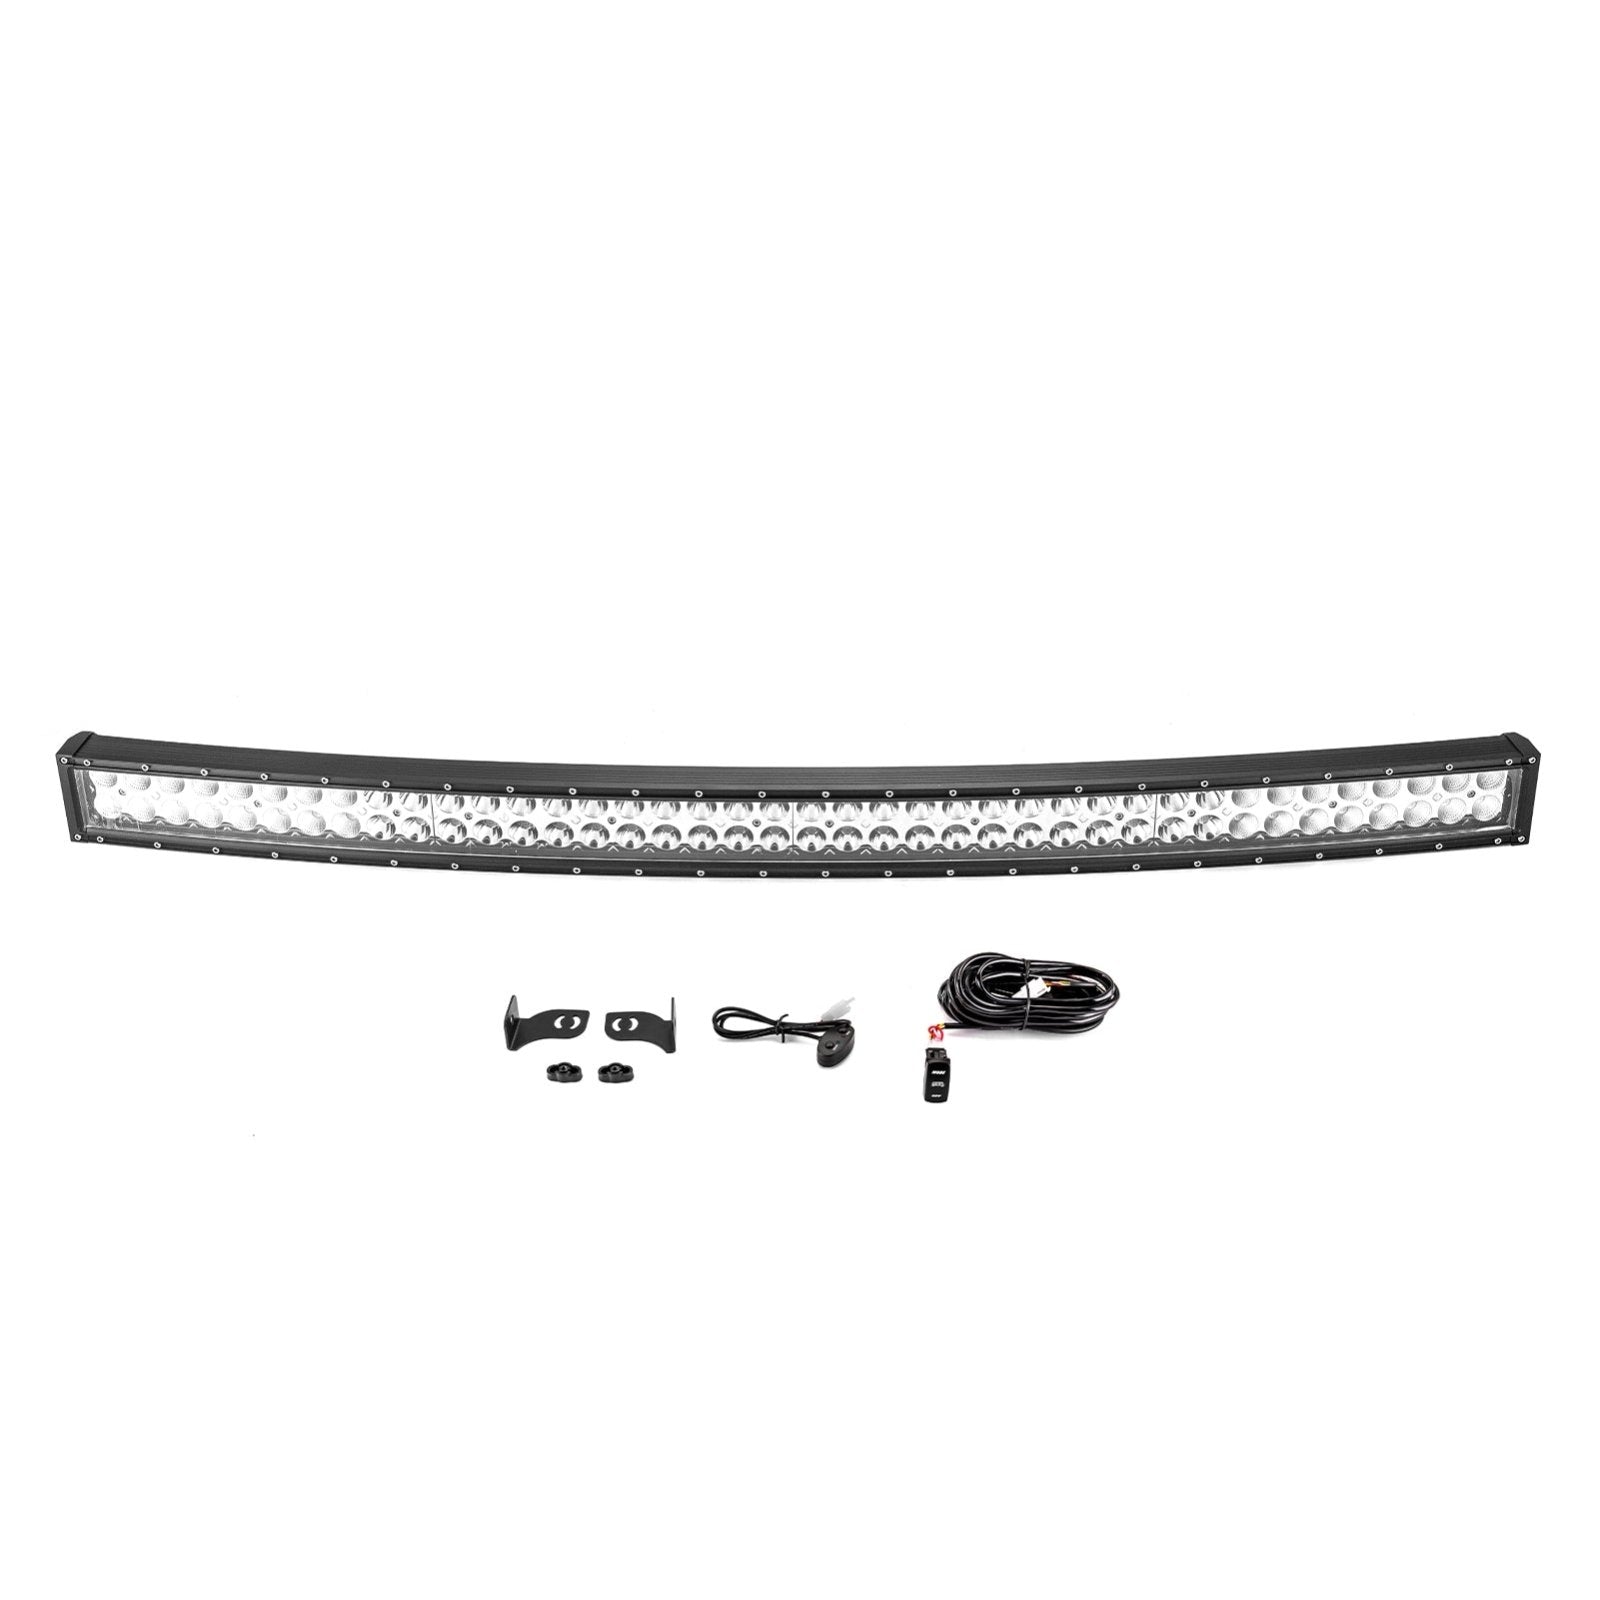 Chevy Toyota Dodge Ram 300W 52" Dual Rows Curved LED Light Bar W/ Wiring Harness Kit | Amber White & Strobe Modes - Weisen